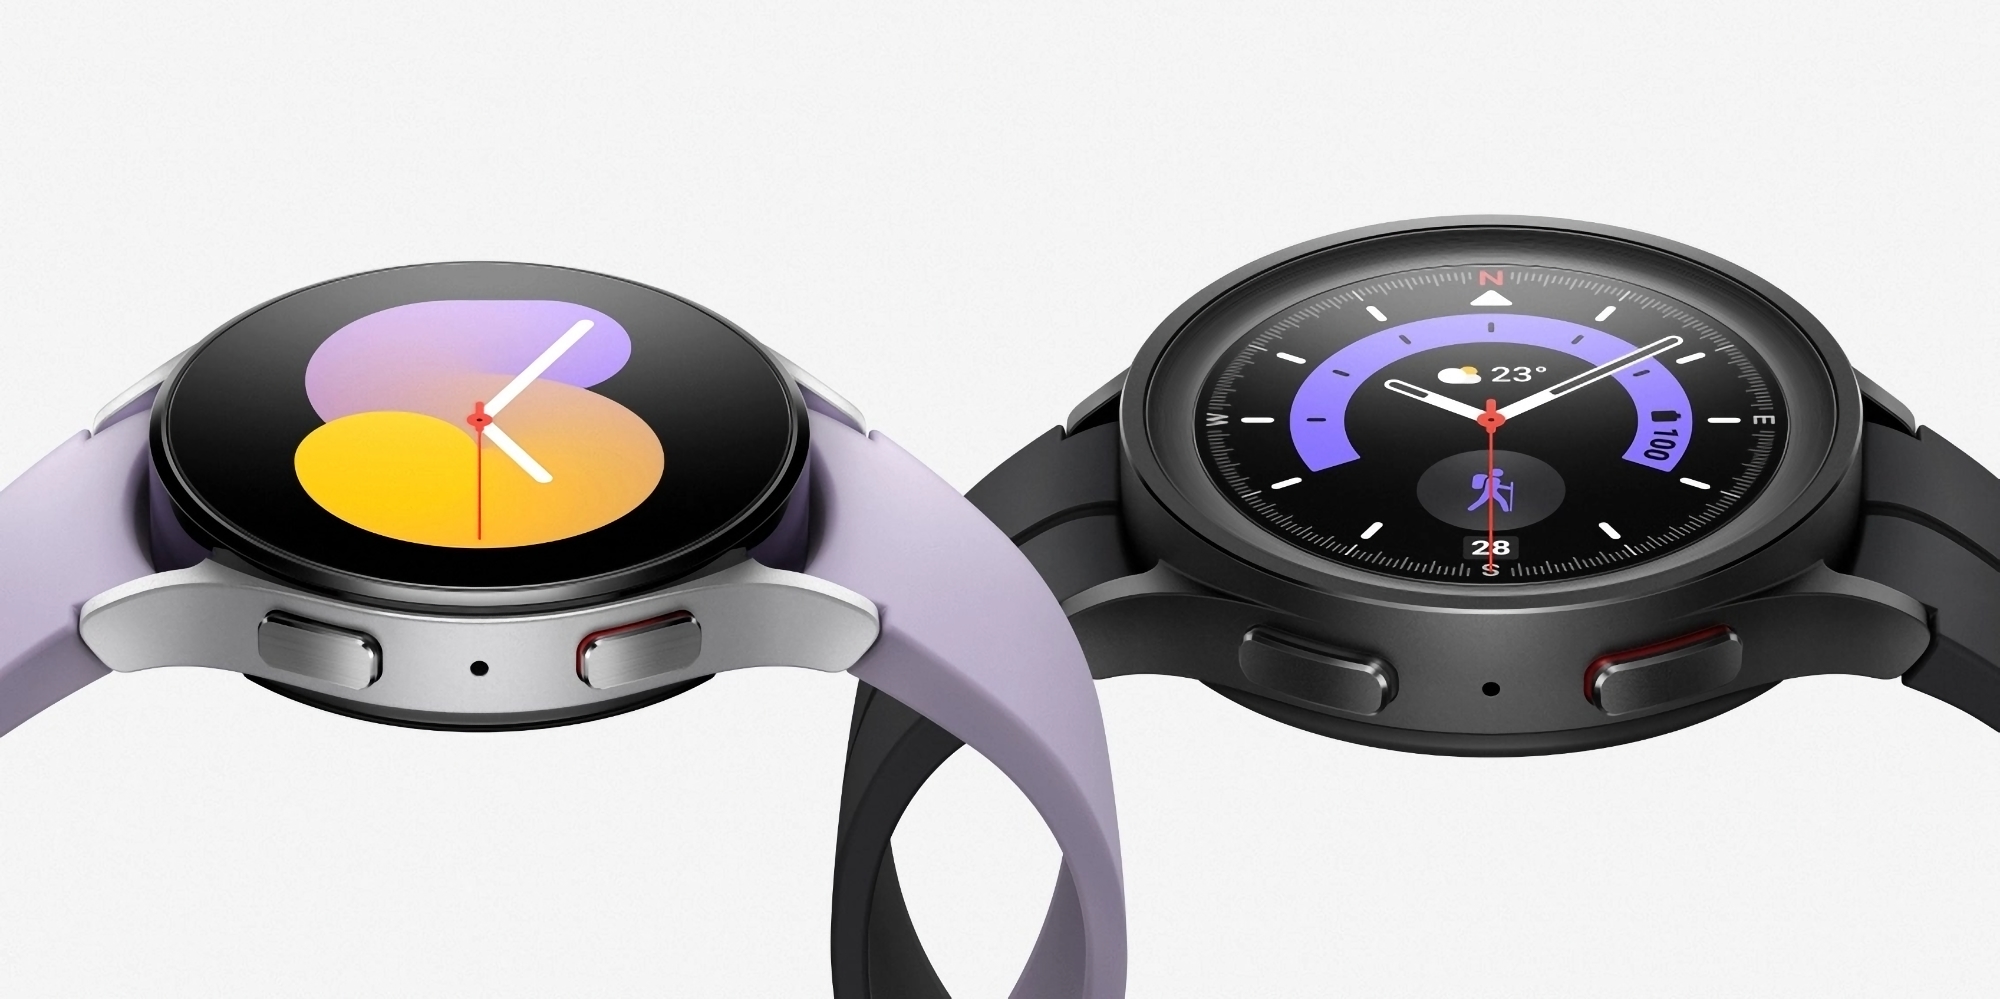 Samsung Galaxy Watch 6 and Galaxy Watch 6 Pro will come in four sizes, with the largest model getting a 46mm case